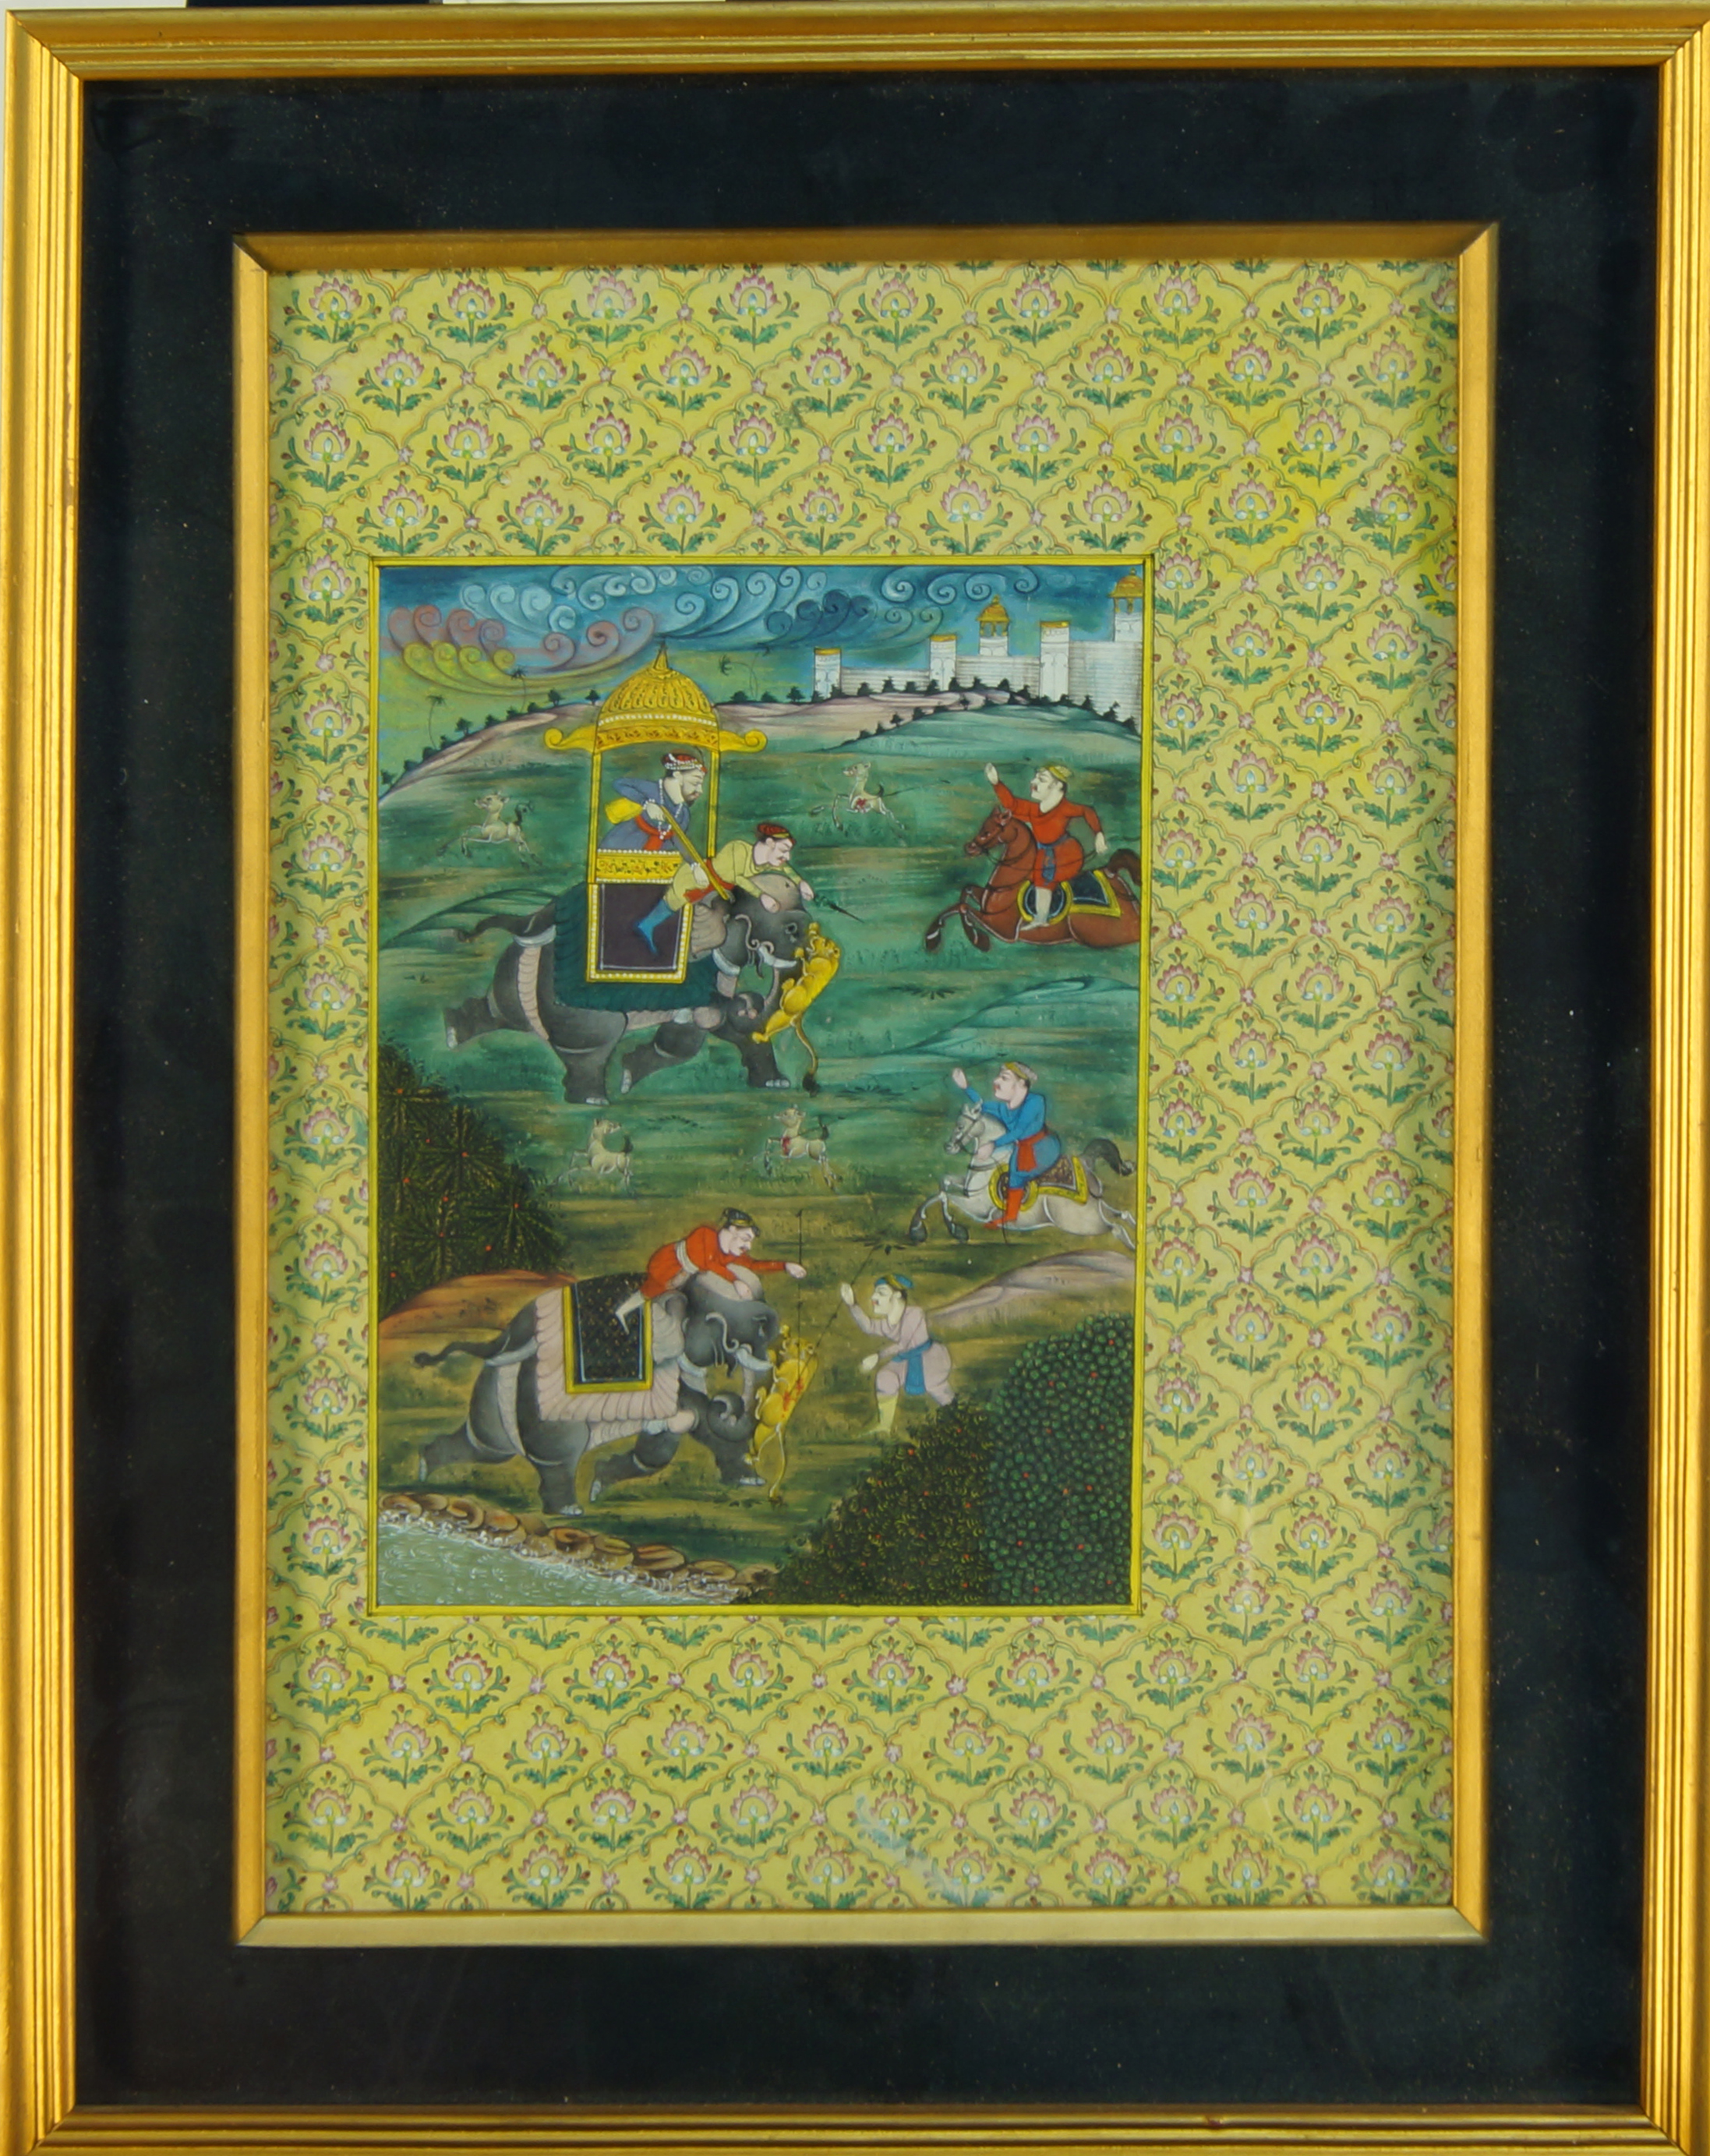 A Persian miniature painting, early 20th century, depicting a hunting scene with nobles riding el... - Image 2 of 2